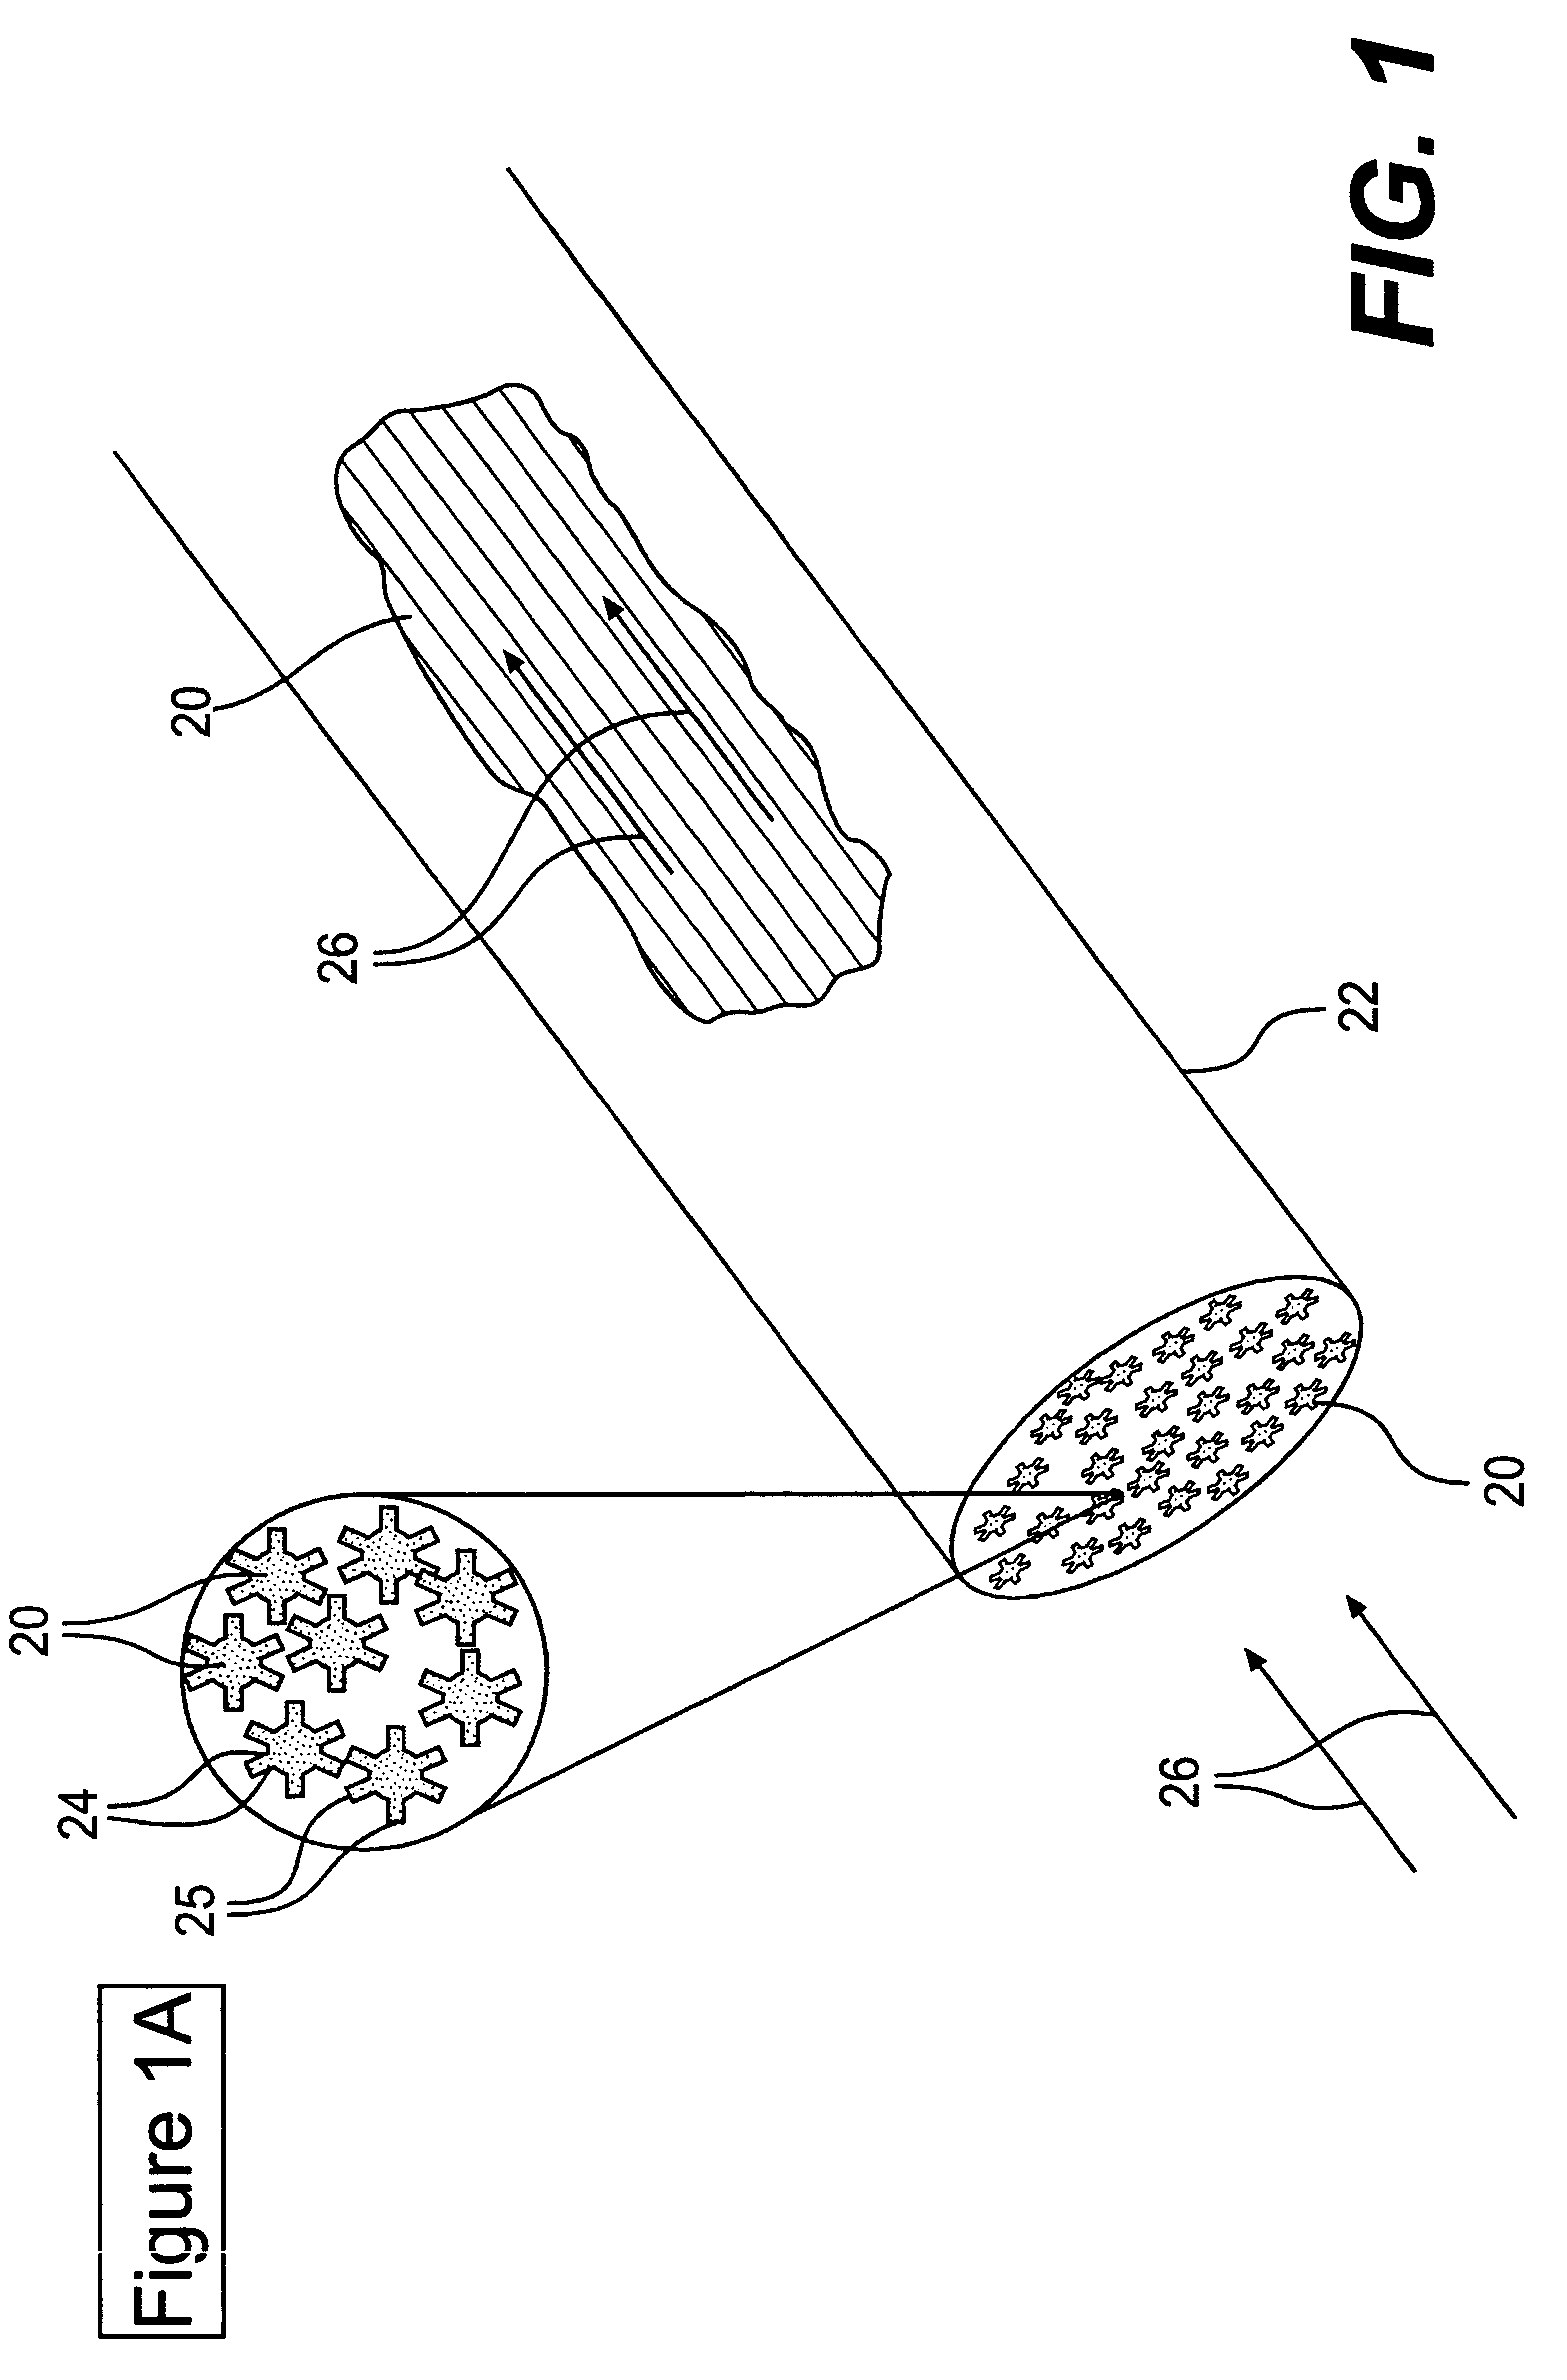 Monolithic structures comprising polymeric fibers for chemical separation by liquid chromatography